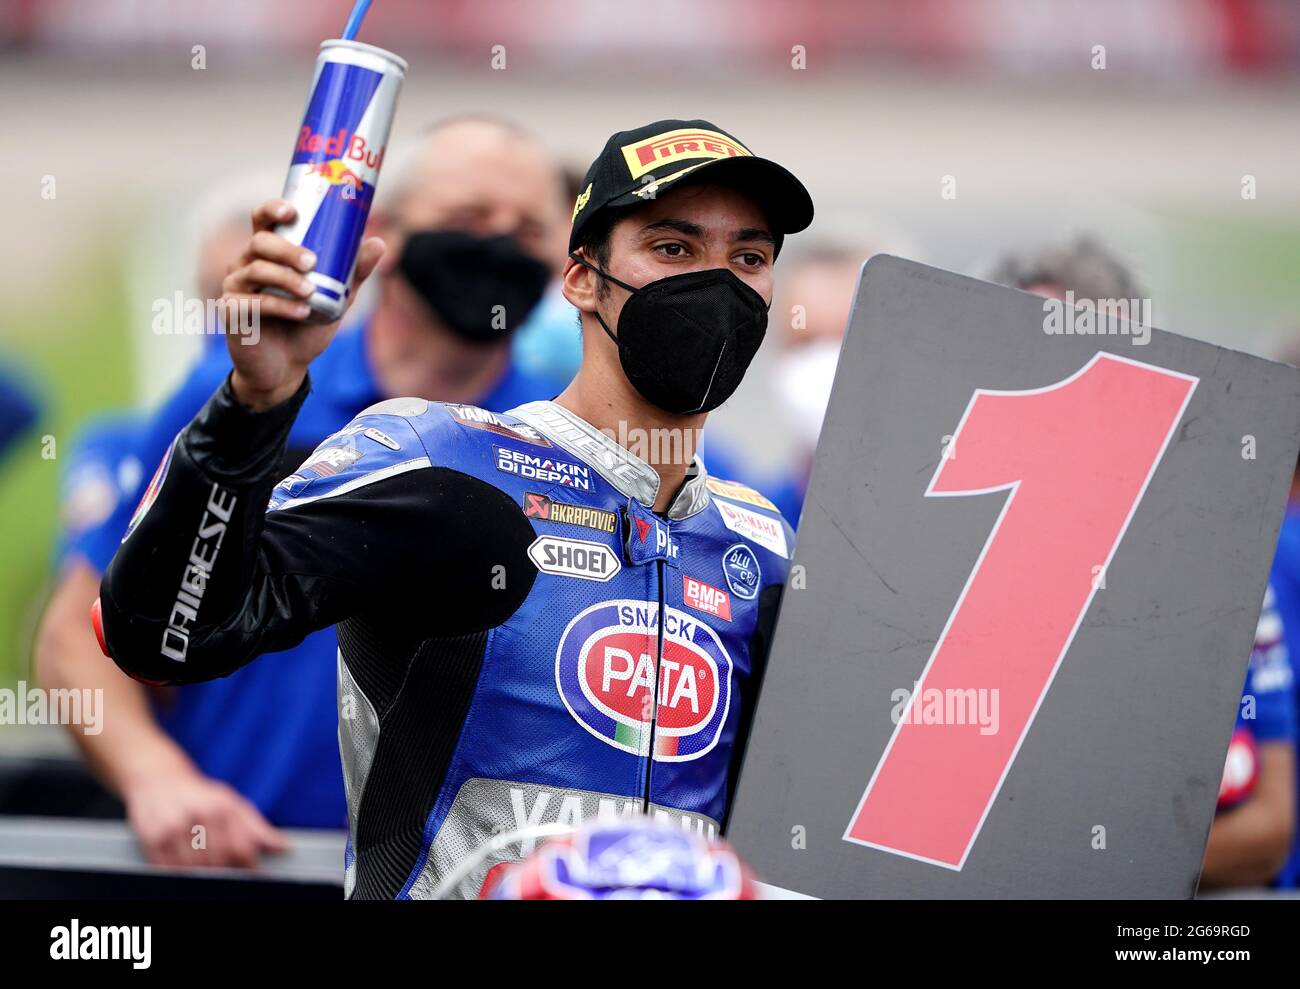 Toprak Razgatl?oglu poses for photos after winning Race 2 during day two of the Motul Fim Superbike Championship 2021 at Donington Park, Leicestershire. Saturday July 4, 2021. Stock Photo